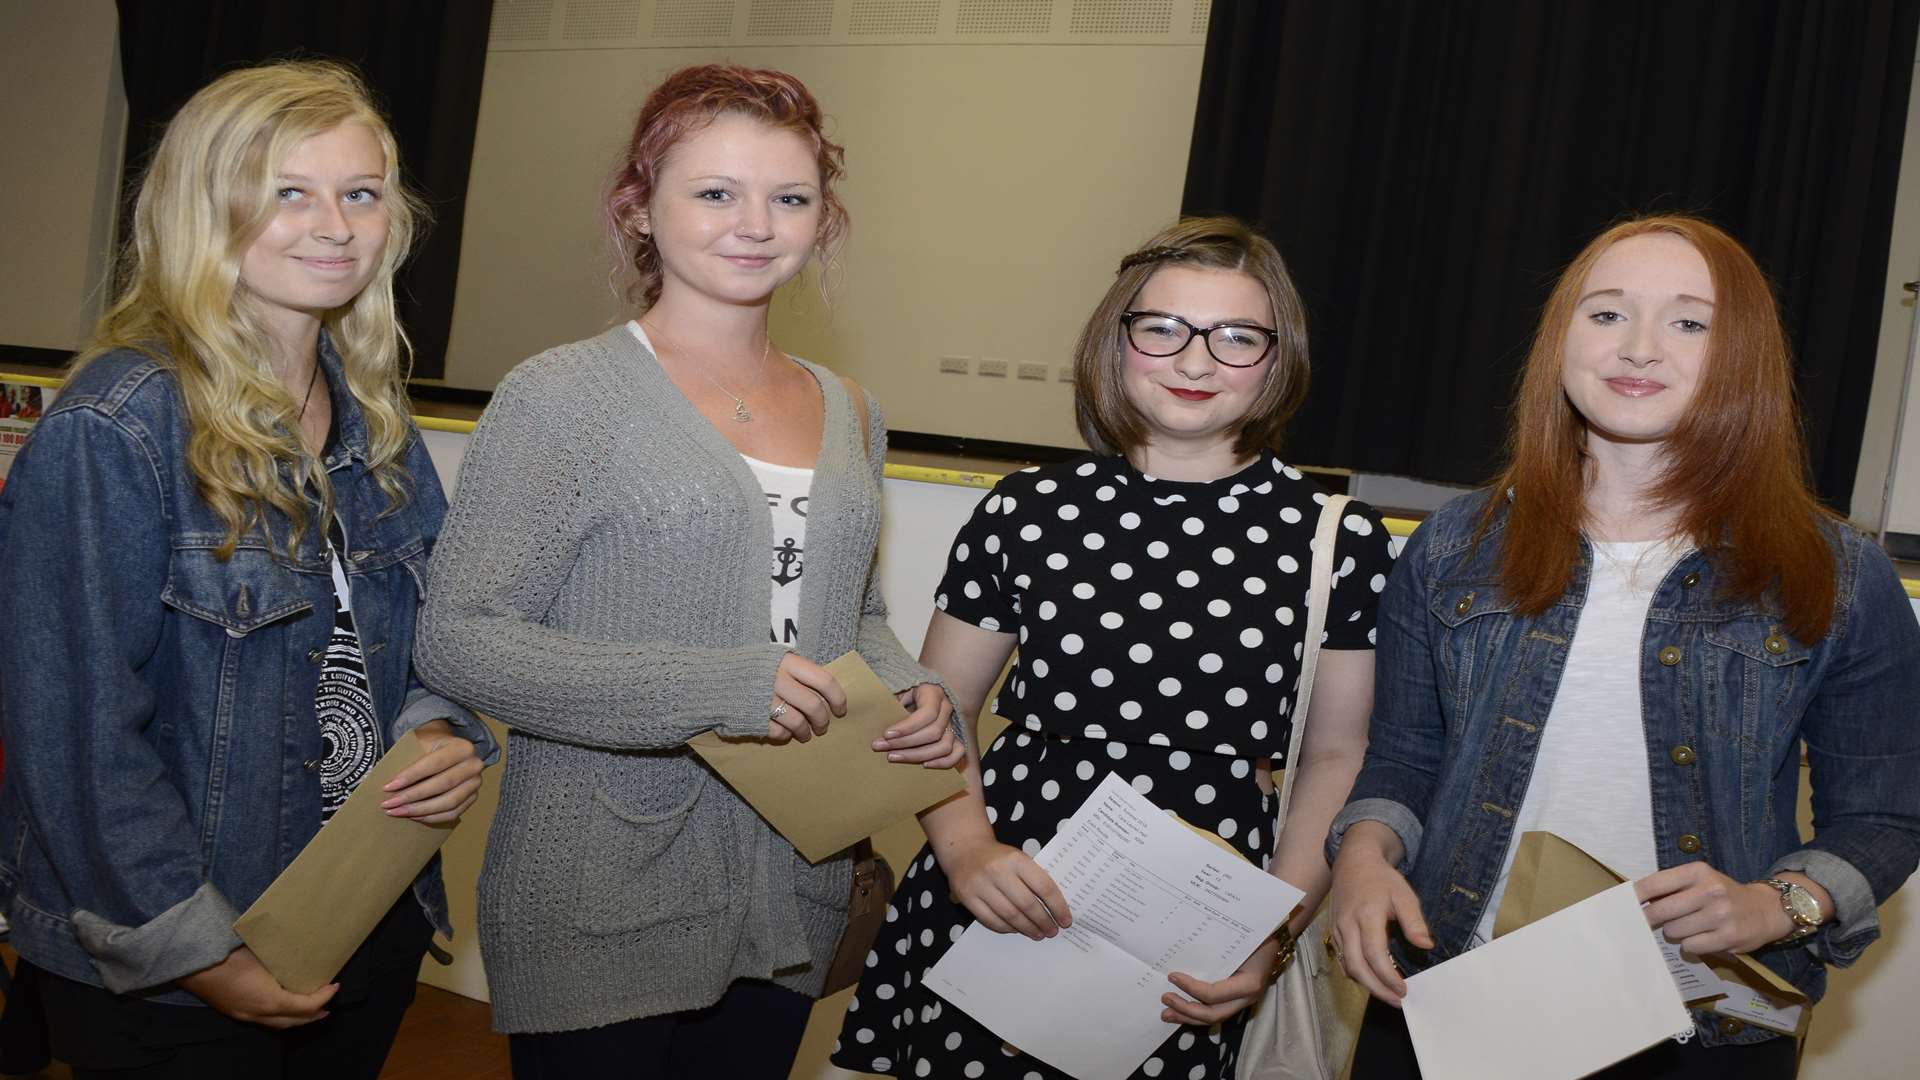 North School pupils Constance Phillips,Sophie Greenway,Cara Hall and Amy Taggart are happy with their results